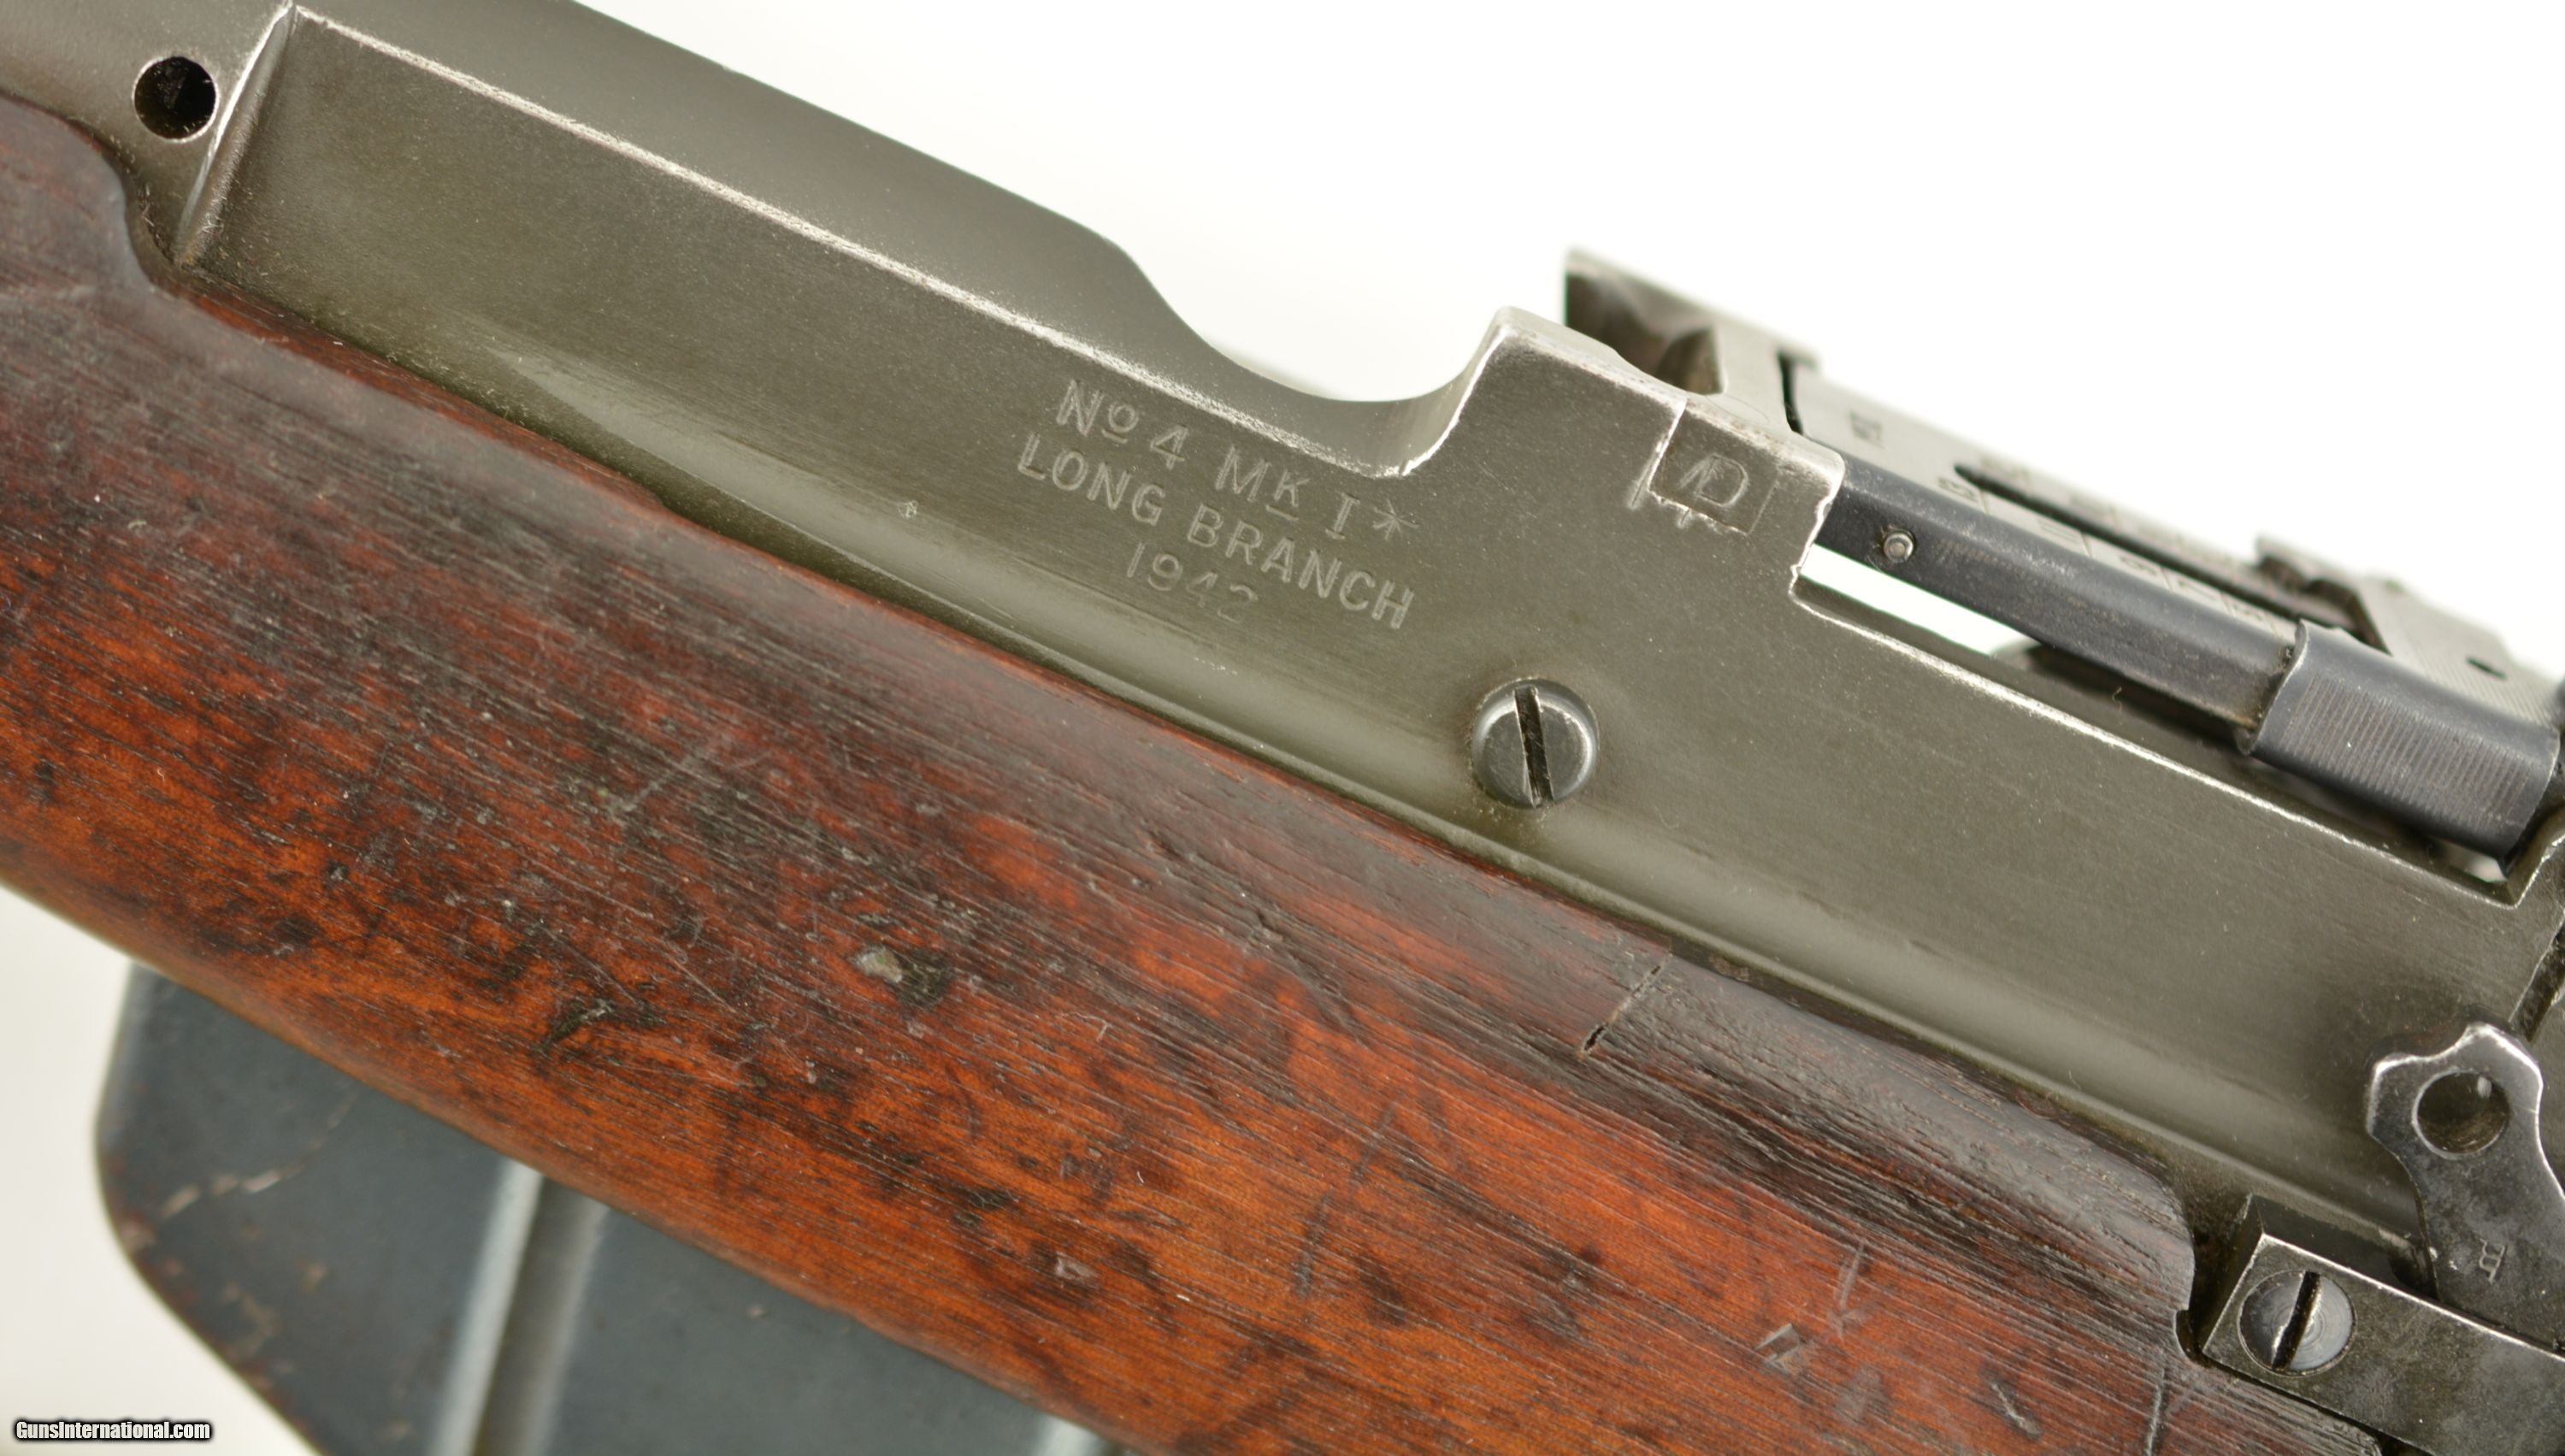 Lot - Royal Canadian Mounted Police Lee-Enfield, No.4 Mk1* (Long Branch)  bolt action rifle